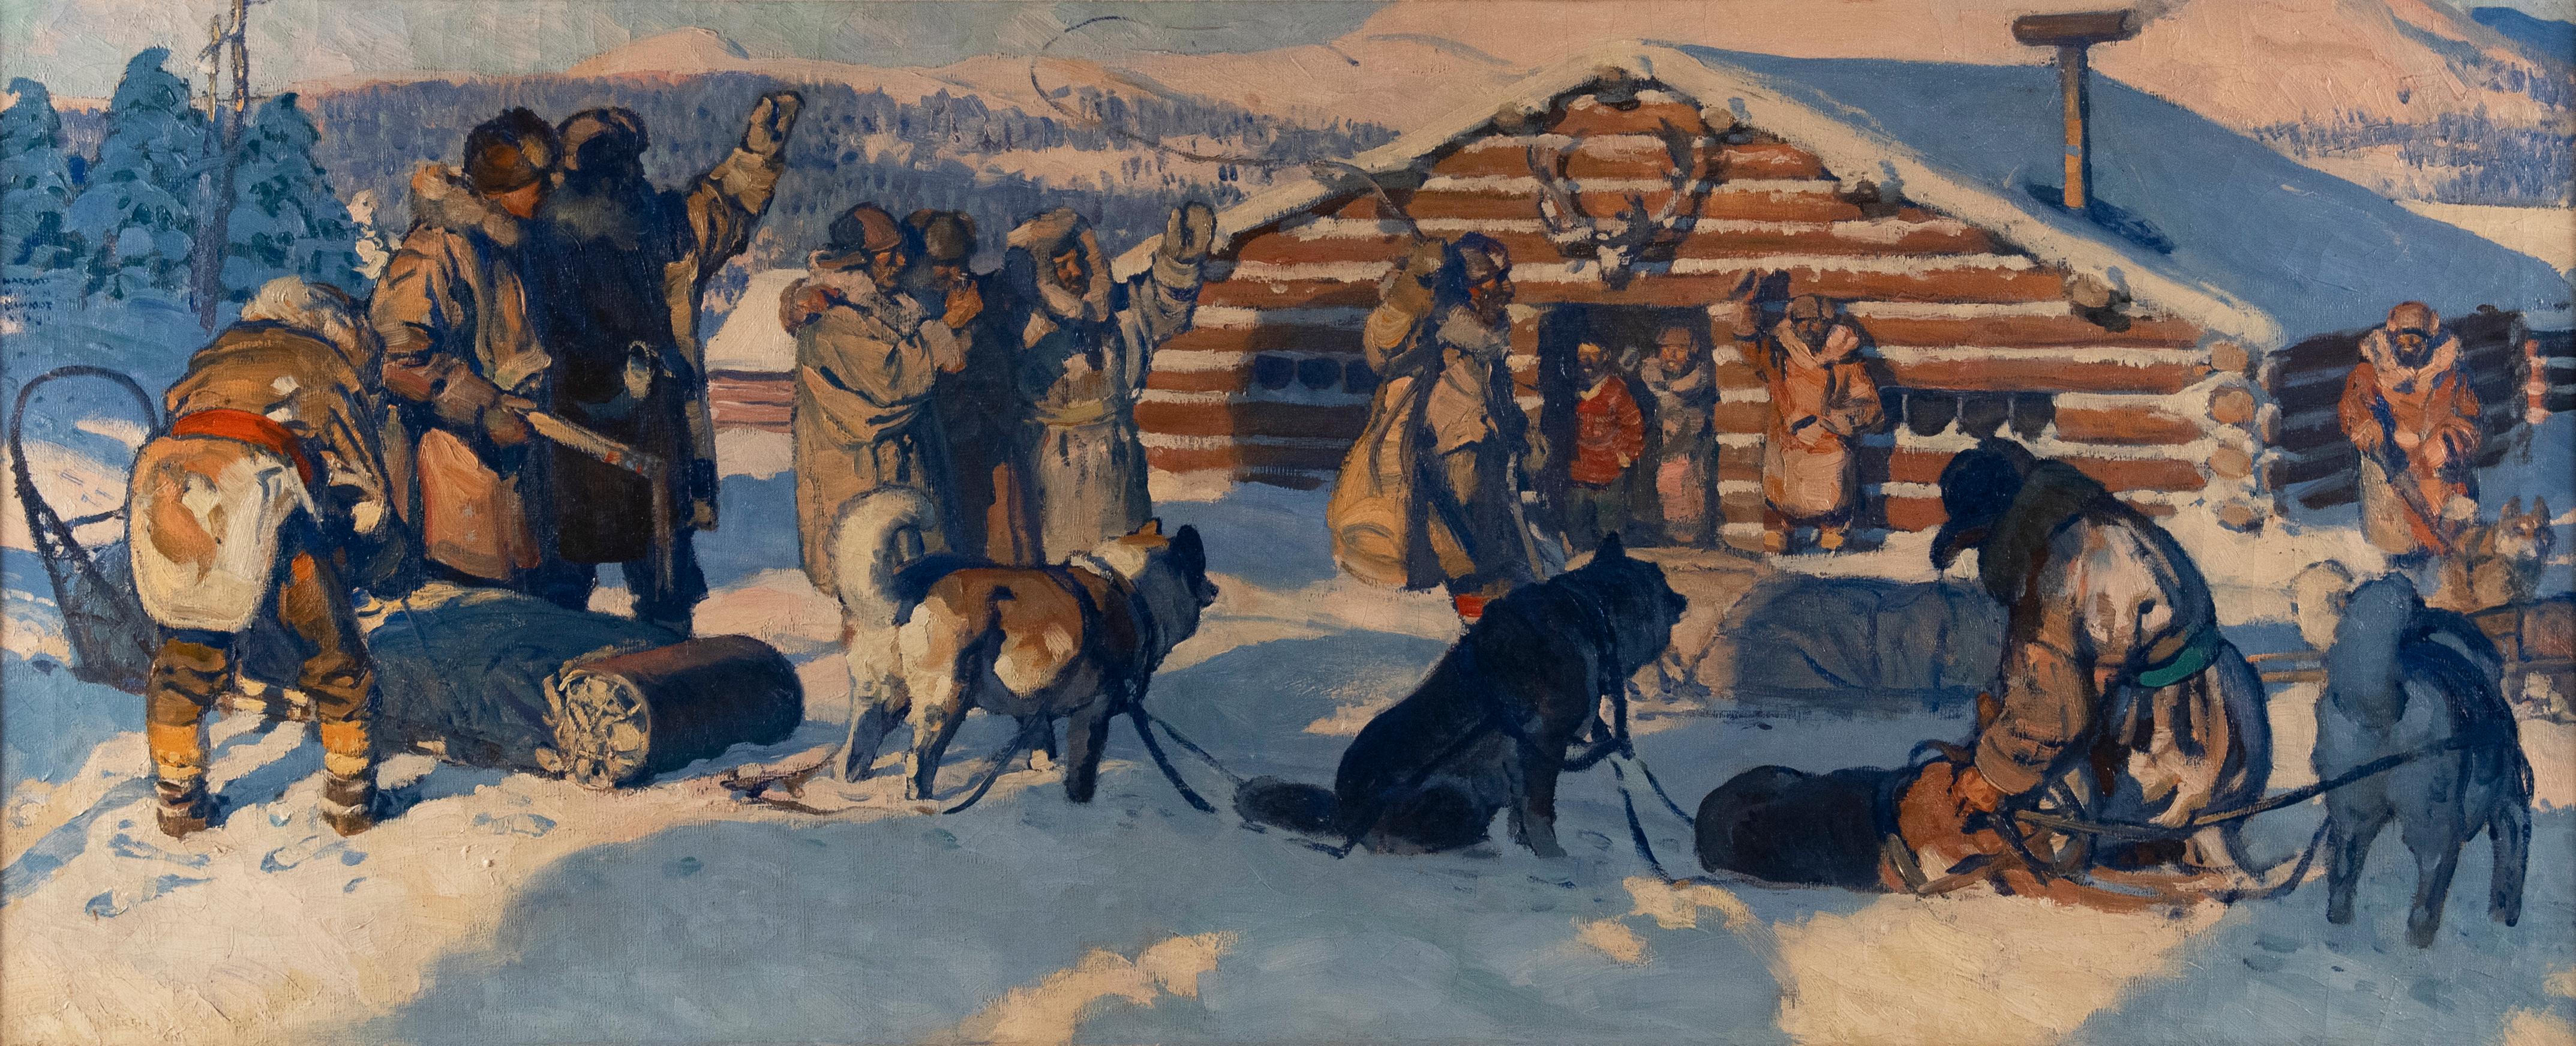 Holiday Spirits Up at Hudson's Bay - Painting by Harold von Schmidt